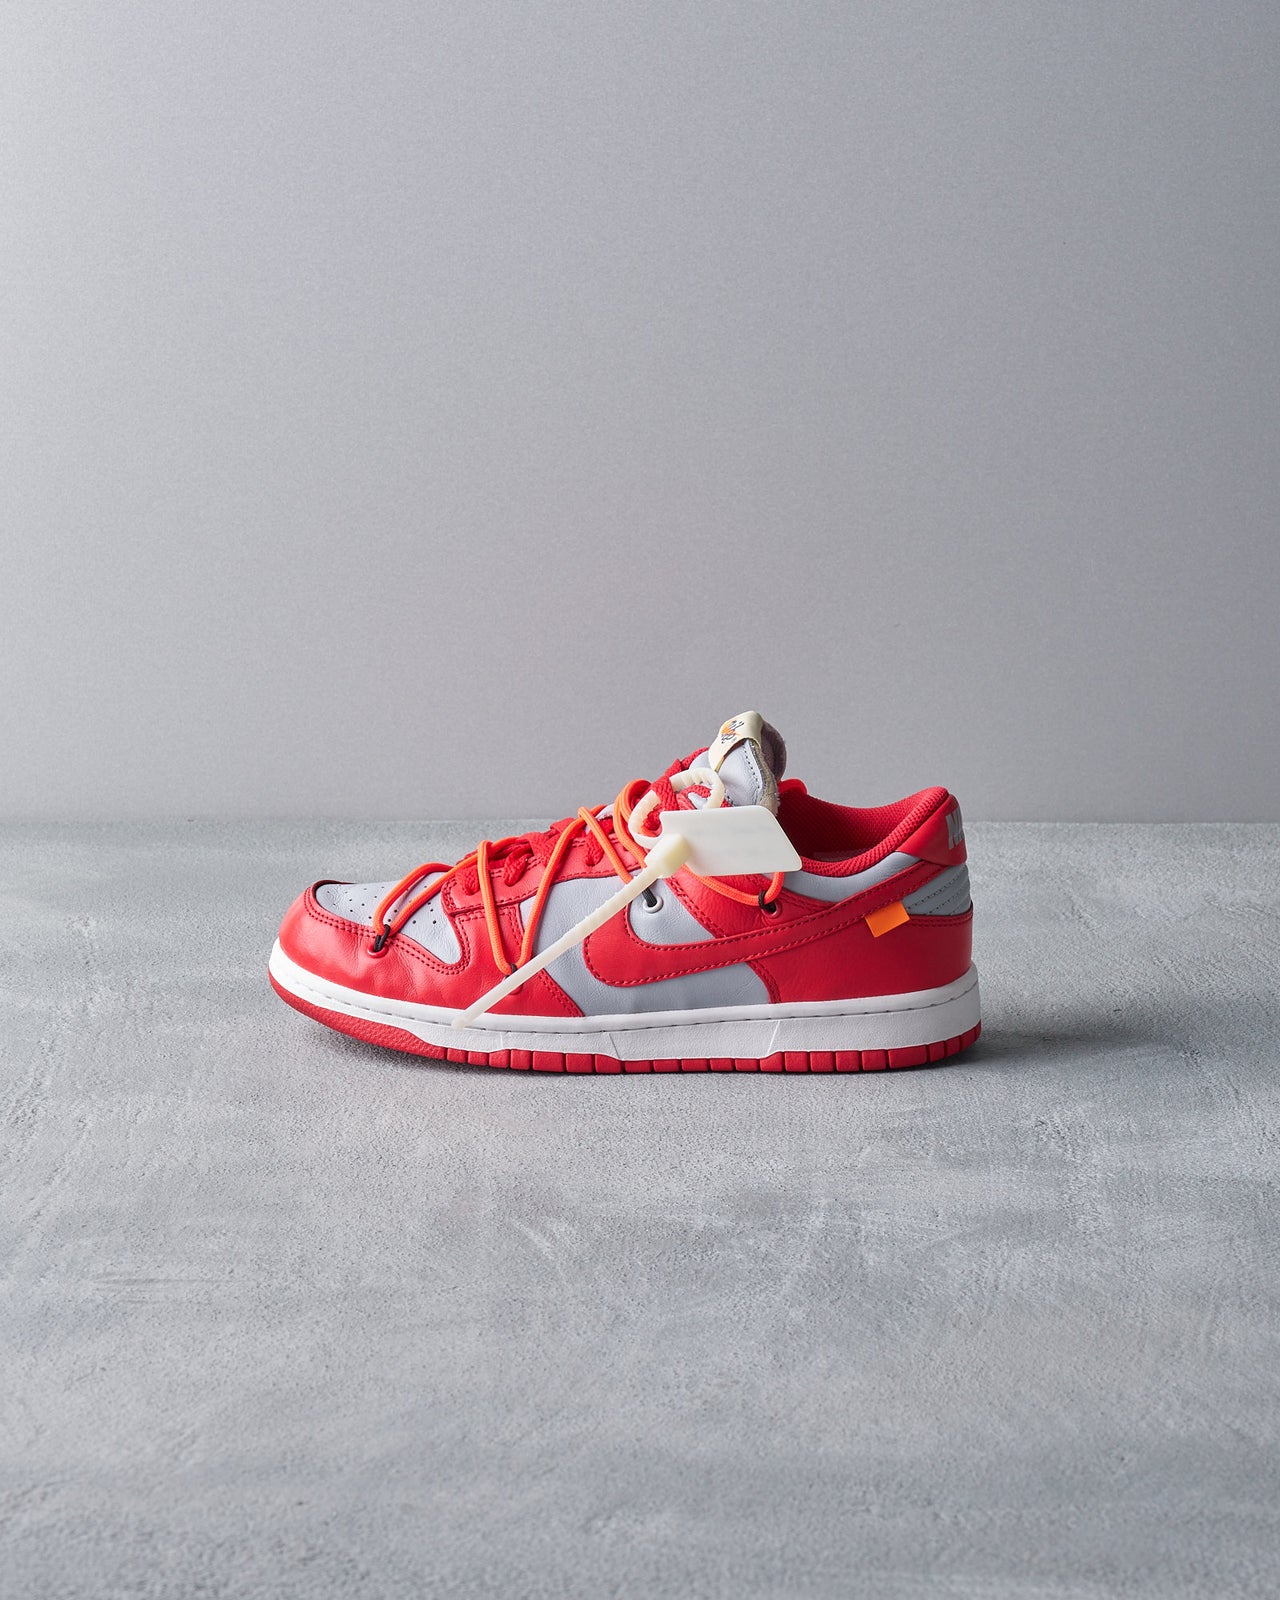 Off-White x Nike Dunk low